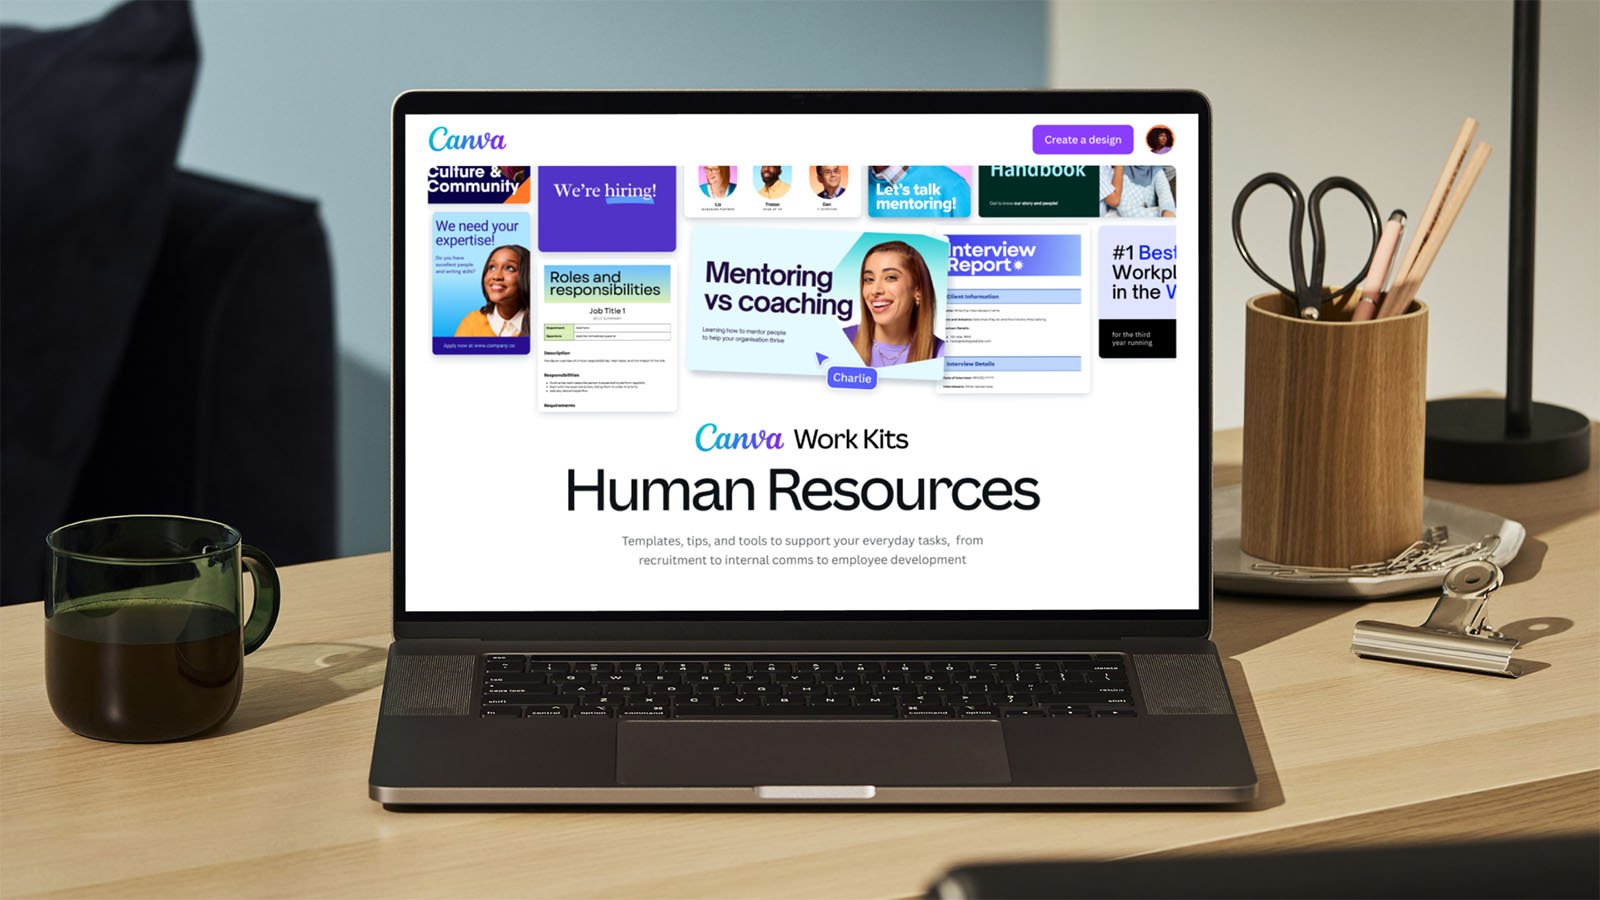 A laptop on a desk displays a Canva webpage for Human Resources work kits including templates, tips, and resources for employee development. The desk also has a coffee cup, plant, and some office supplies. The screen shows various HR themes like mentoring, coaching, and hiring.